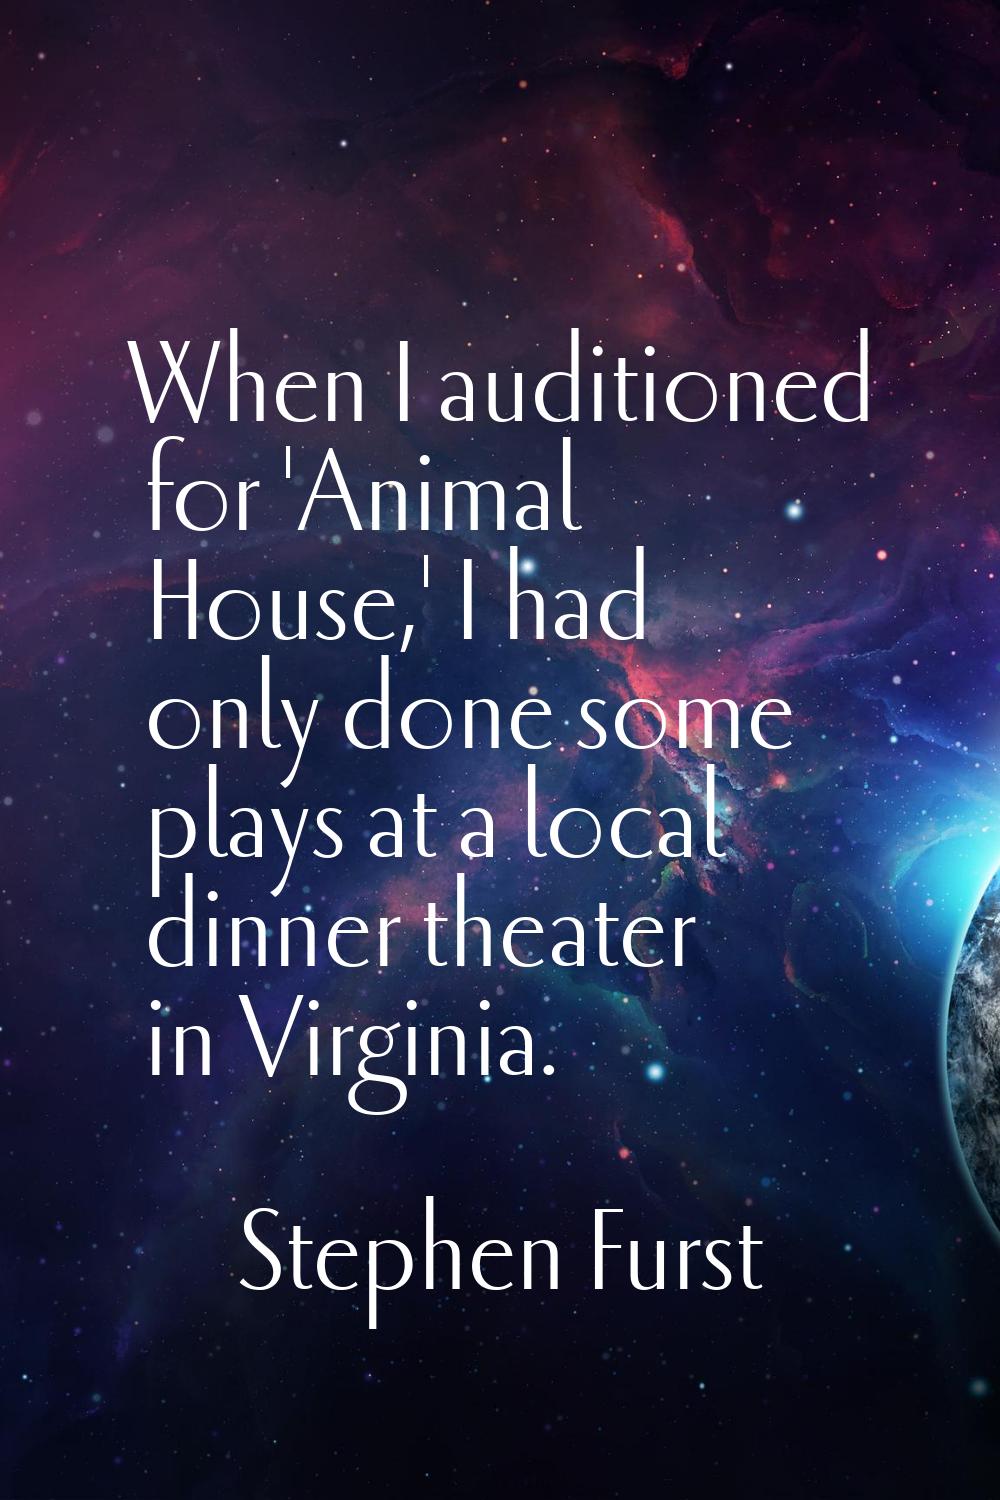 When I auditioned for 'Animal House,' I had only done some plays at a local dinner theater in Virgi